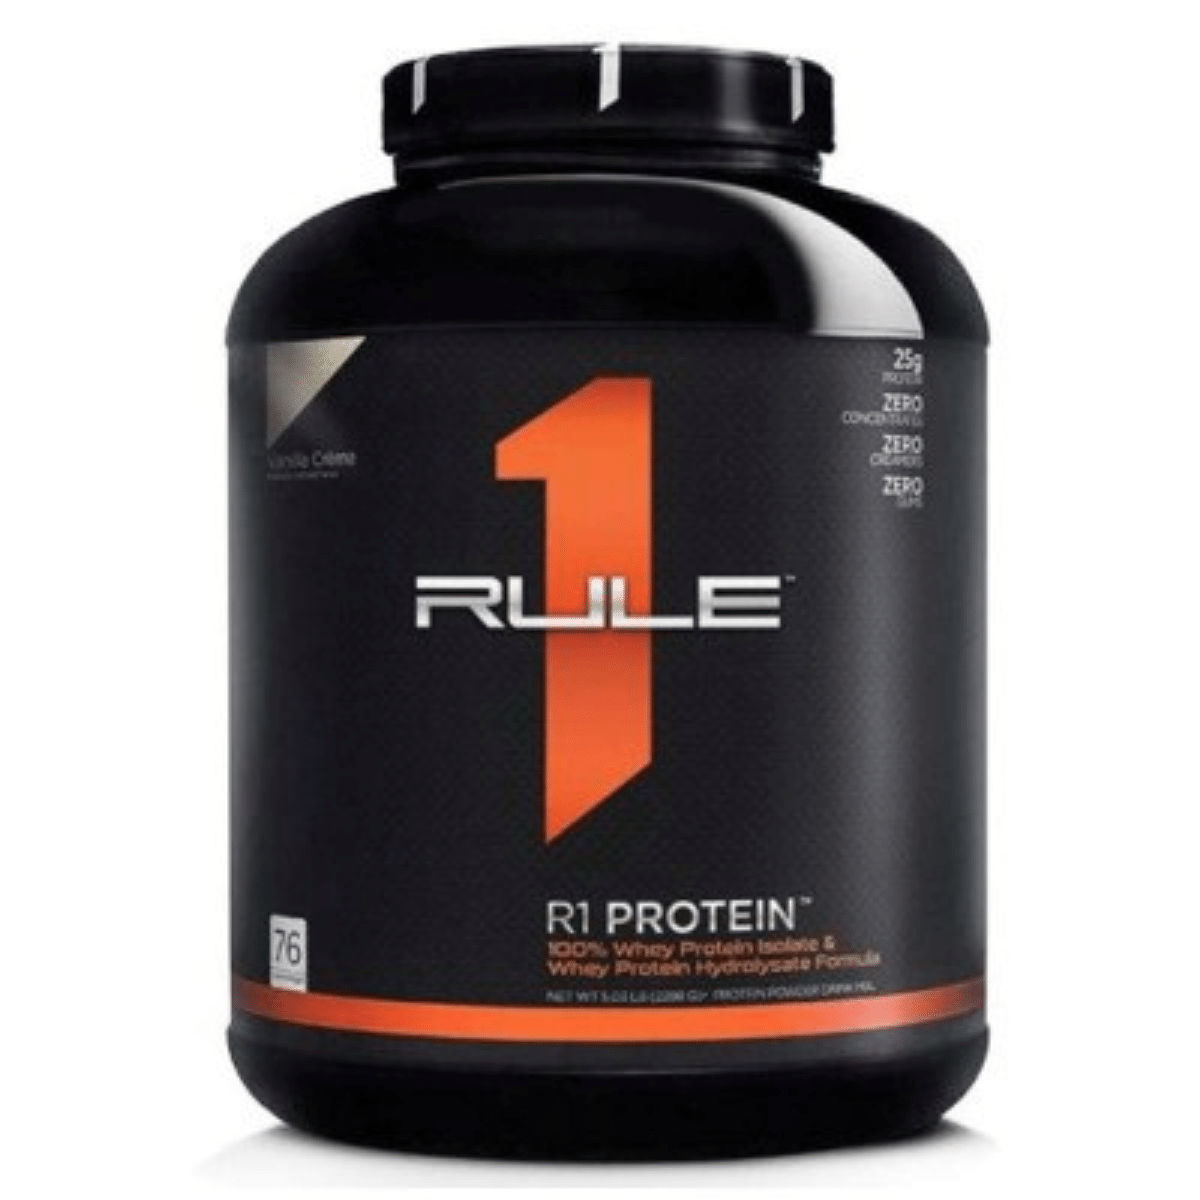 Протеин Rule 1 r1 Protein